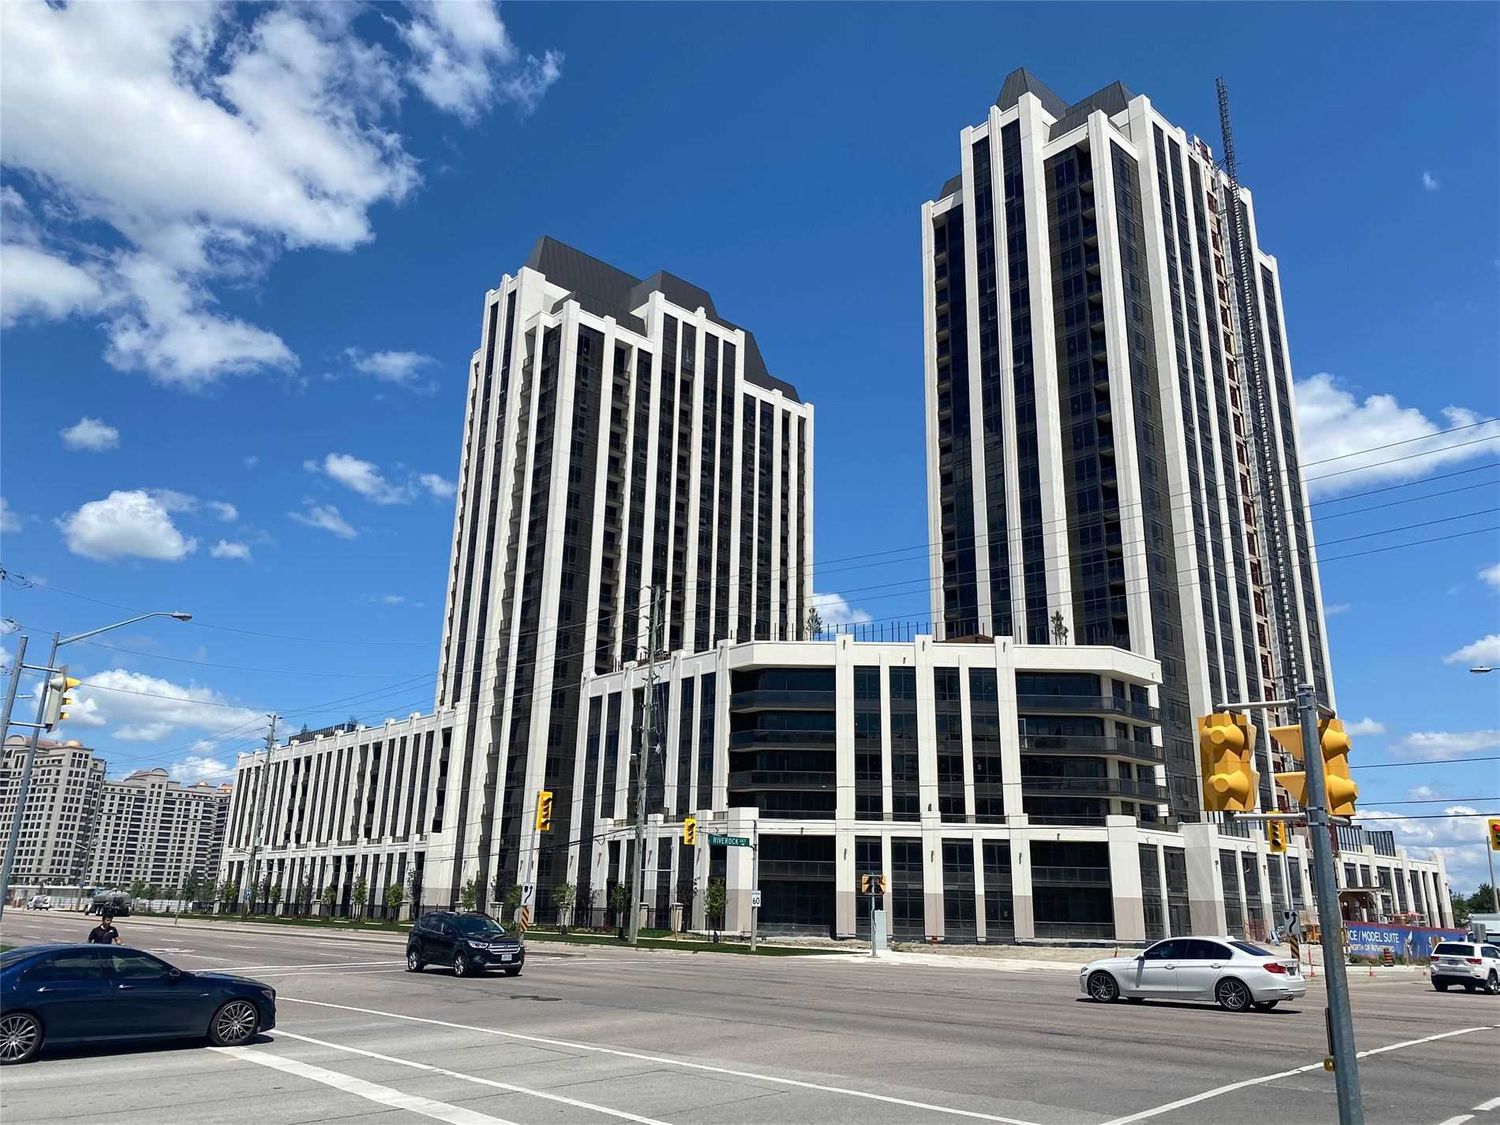 9075 Jane Street. Park Avenue Place Towers is located in  Vaughan, Toronto - image #1 of 2